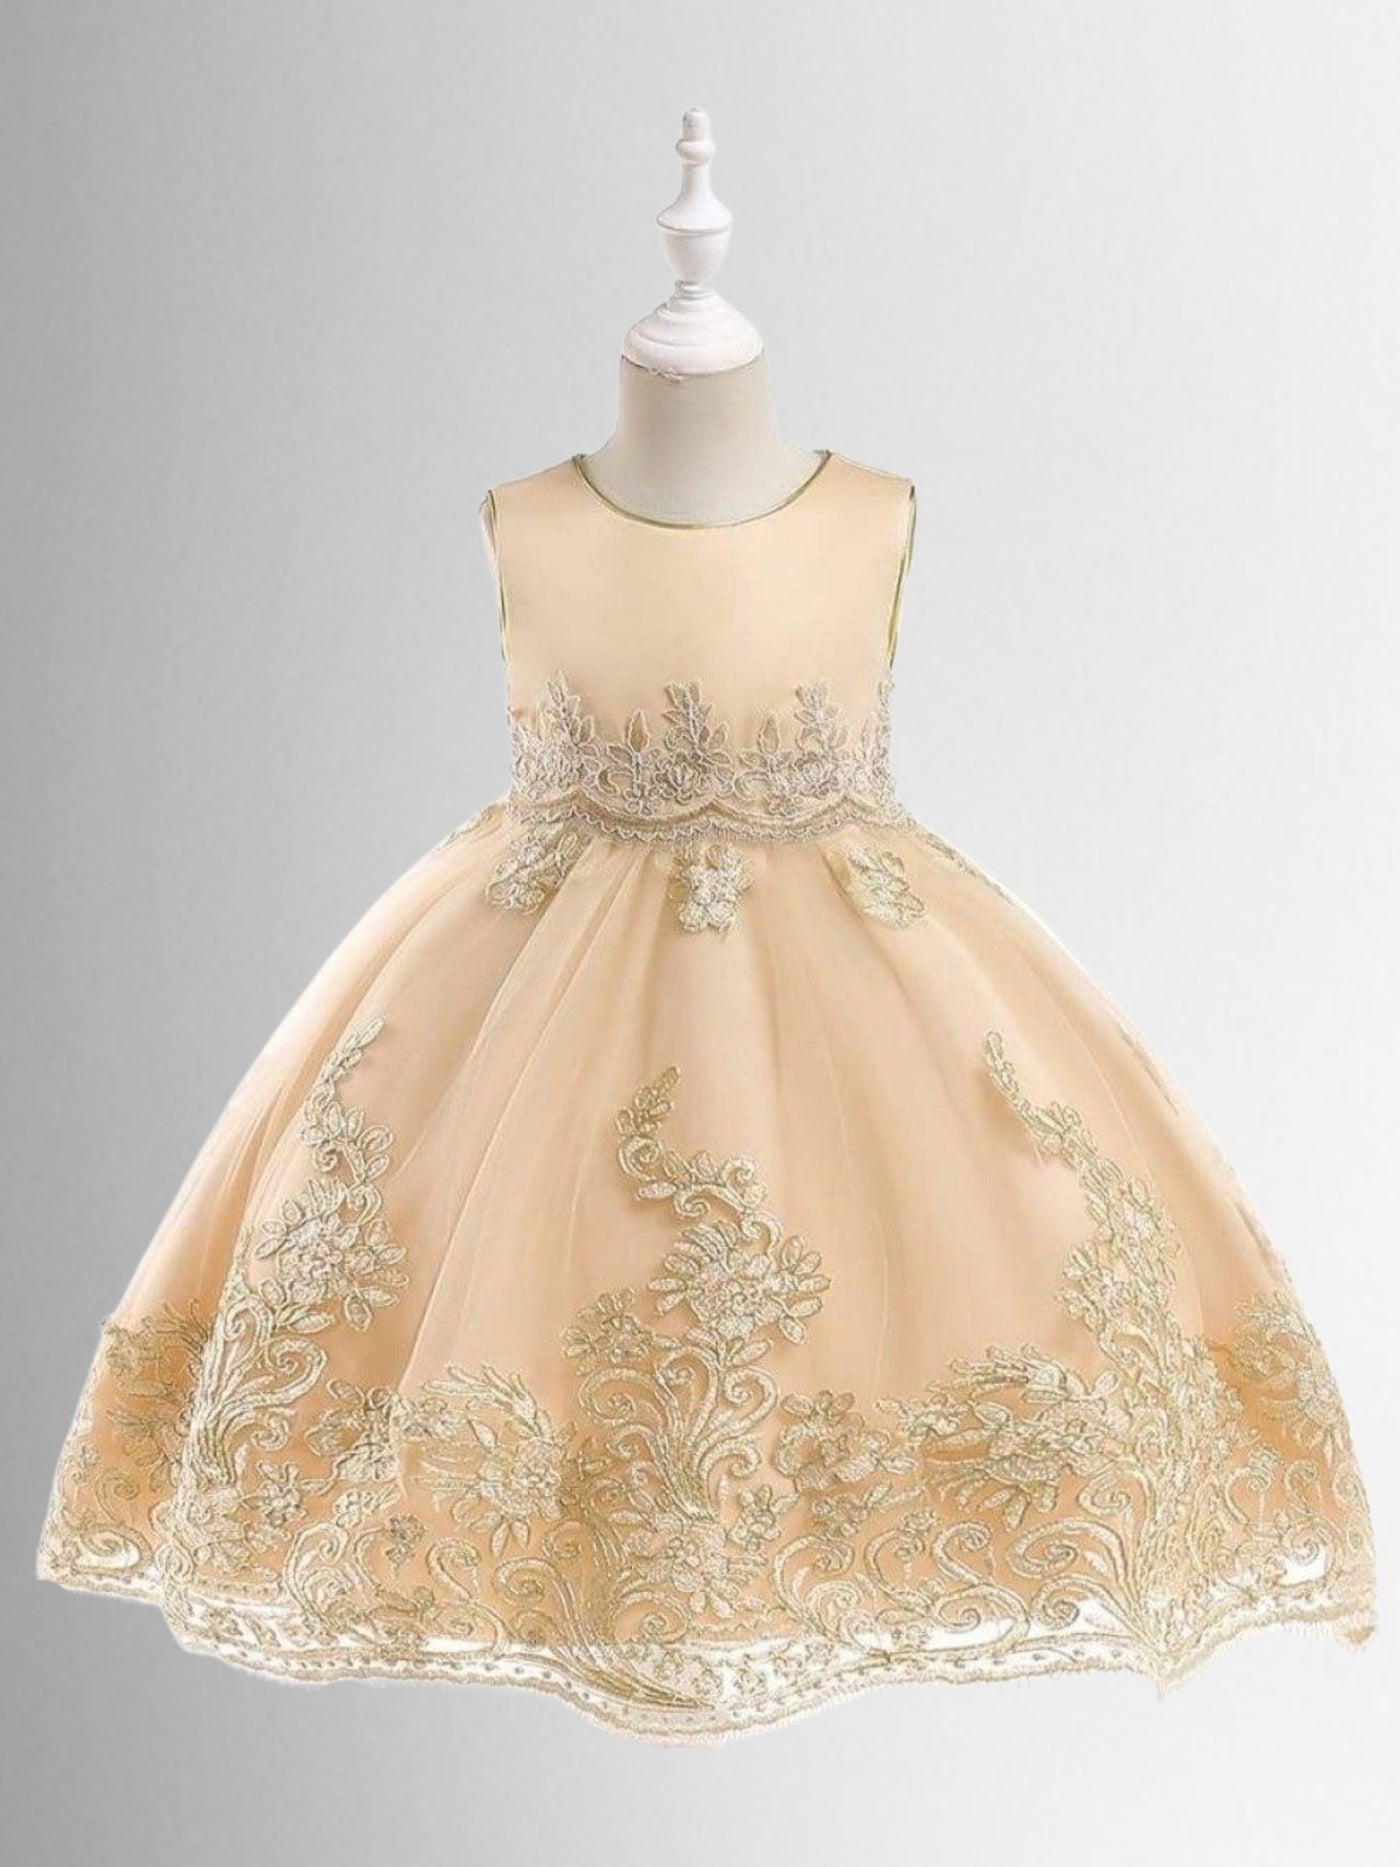 Winter Formal Dresses | Sleeveless Lace Embroidered Holiday Dress